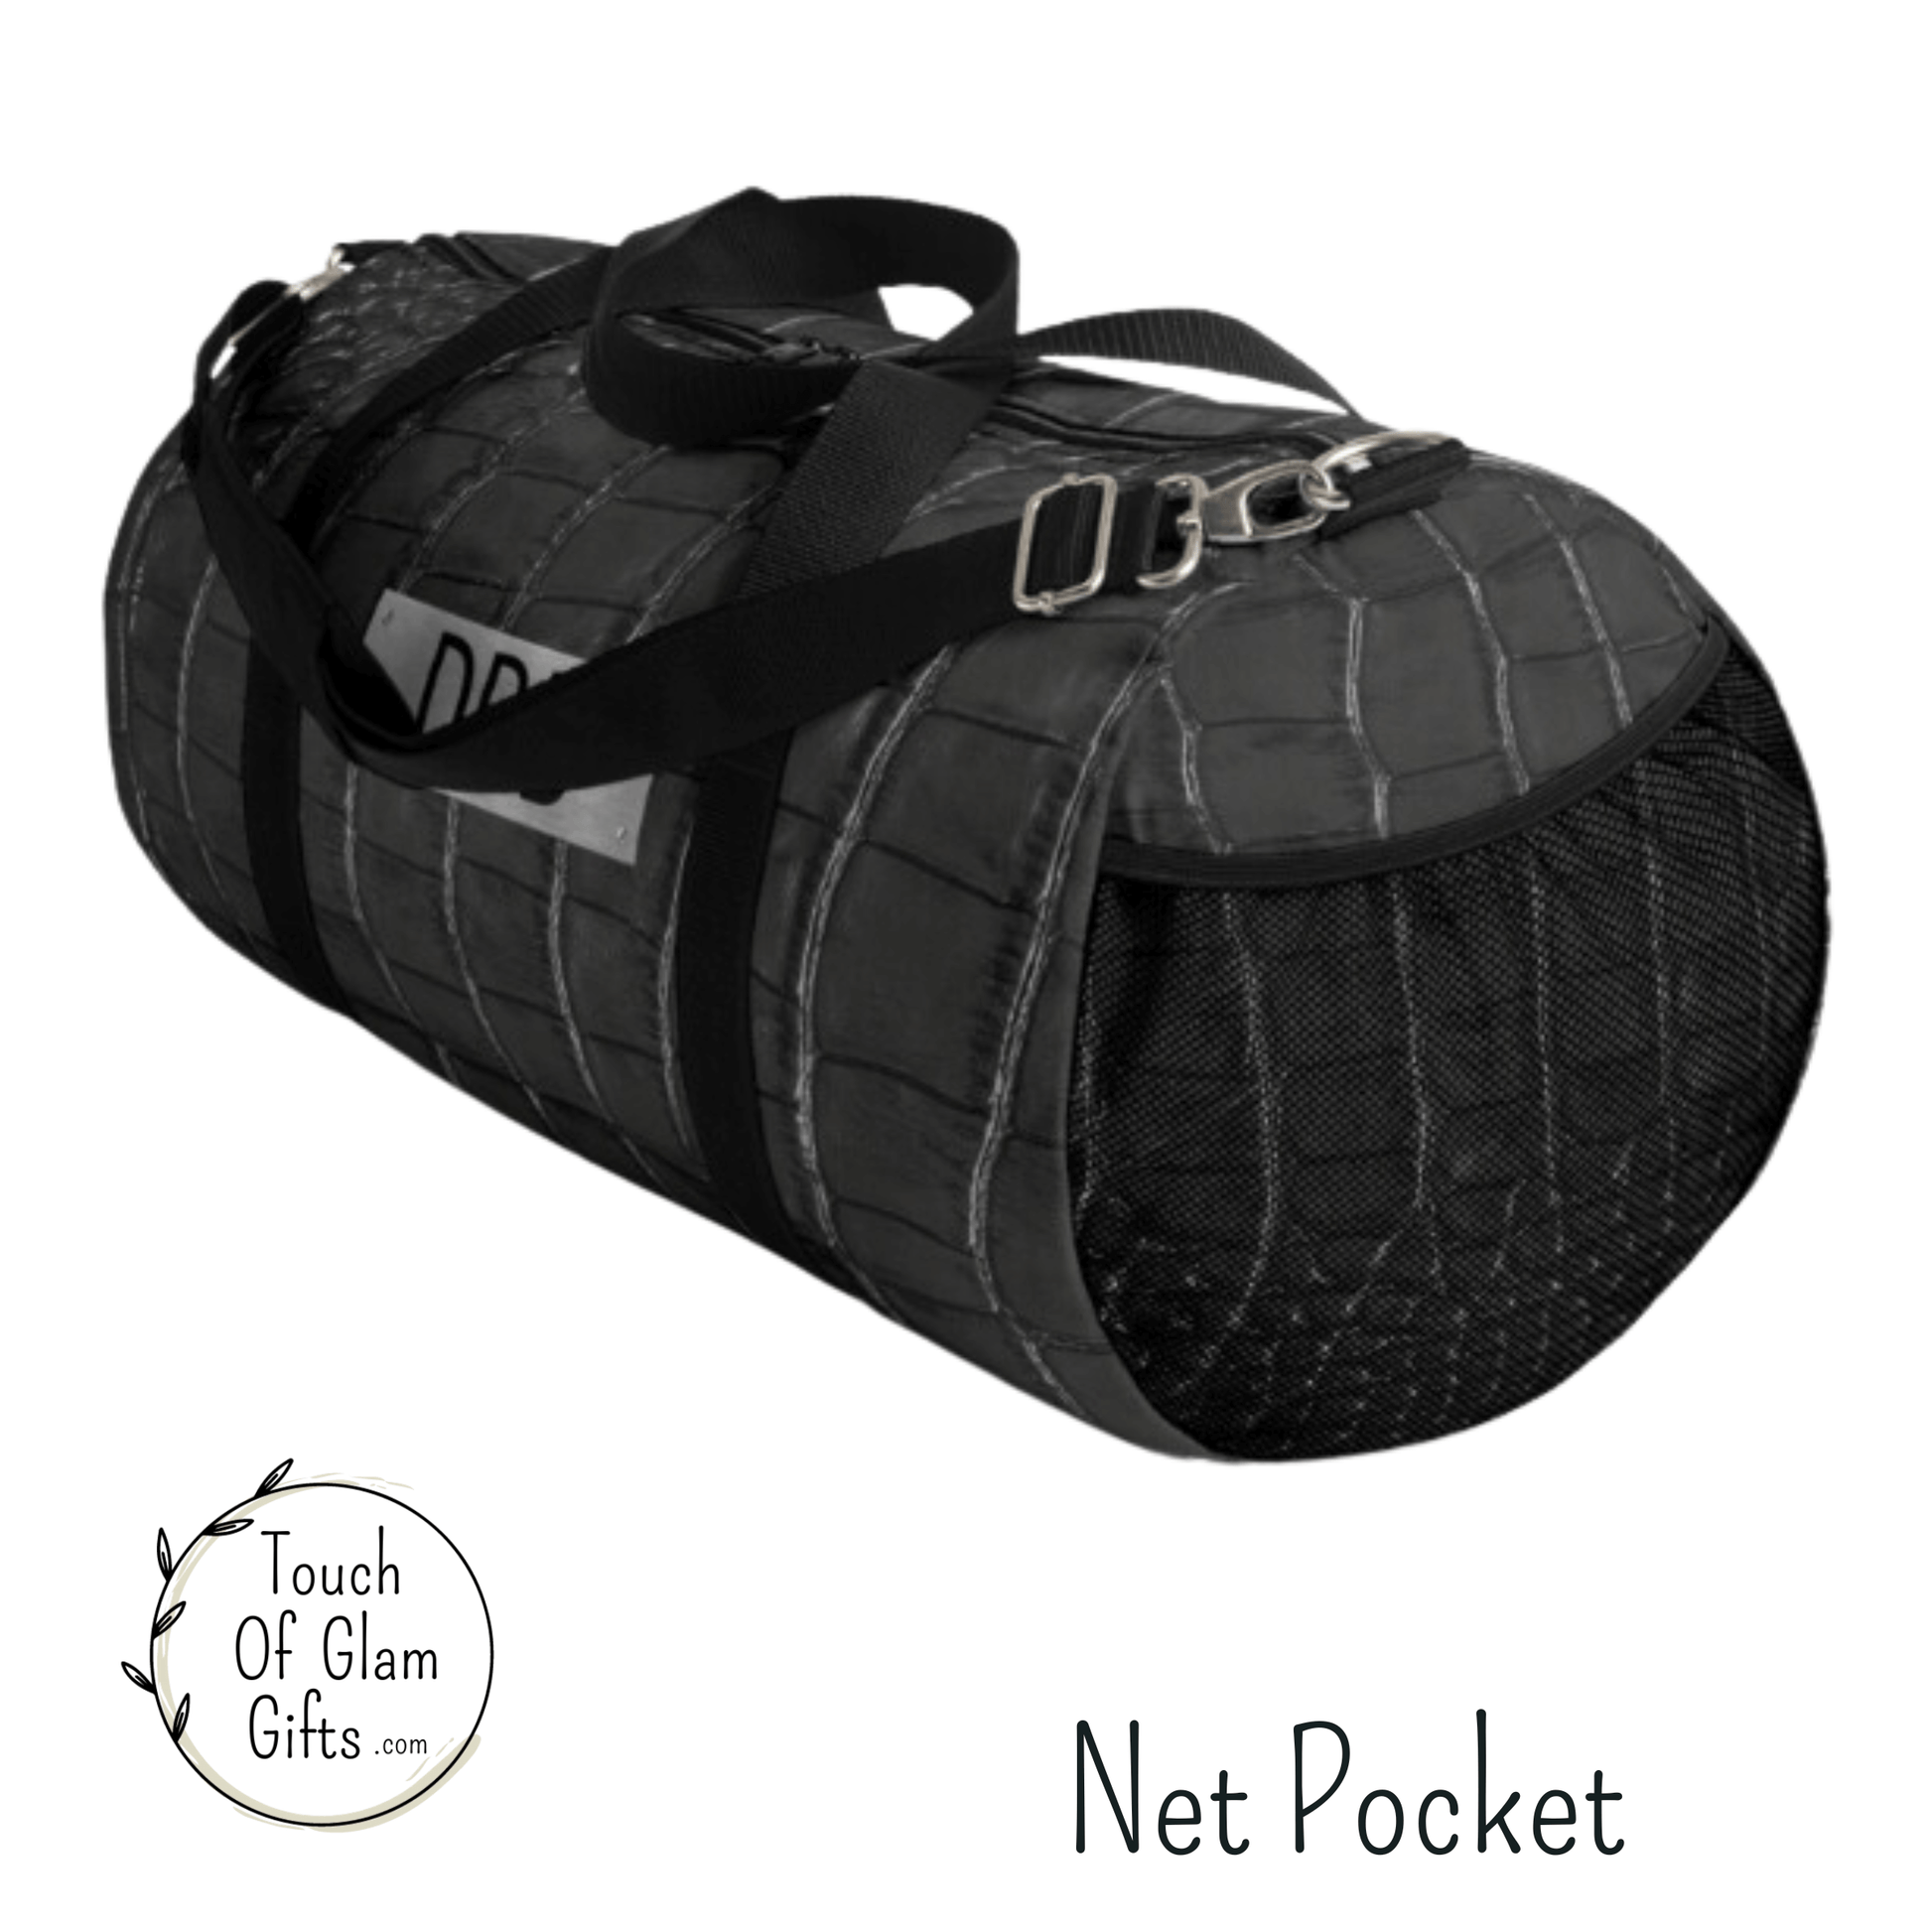 the right side of our dark grey and black snakeskin duffel bag has a sewn in net pocket.